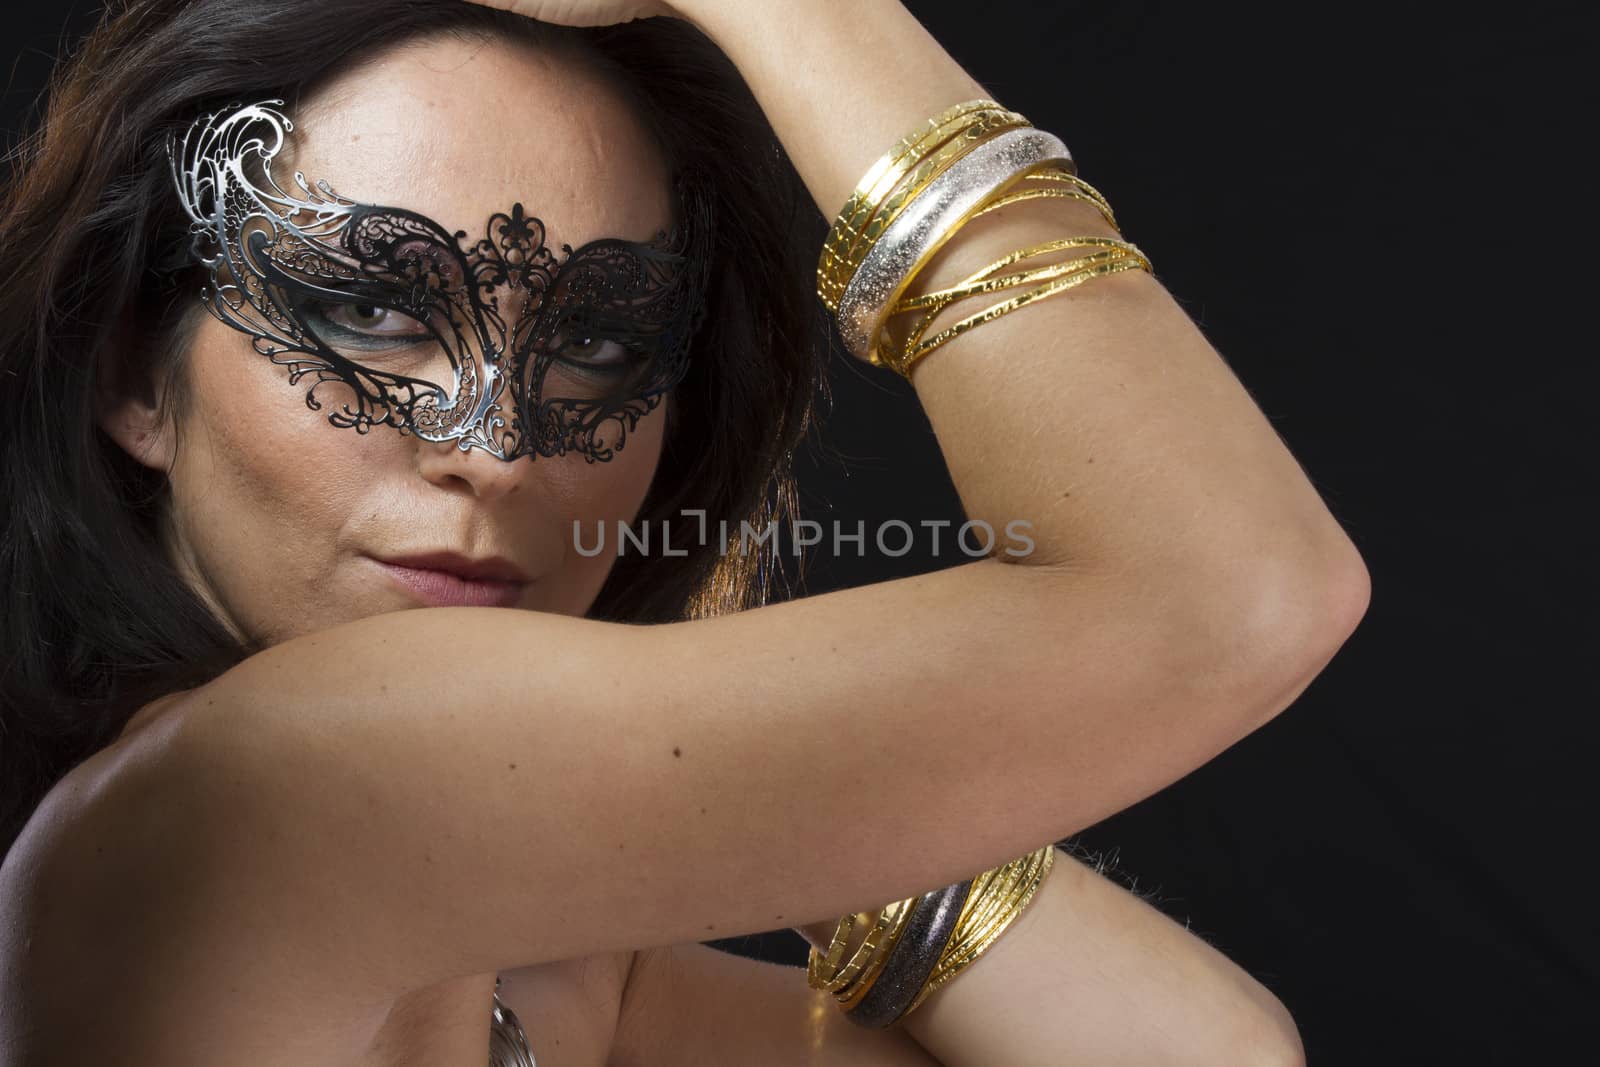 Beautiful young woman in mysterious black Venetian mask. Fashion by FernandoCortes